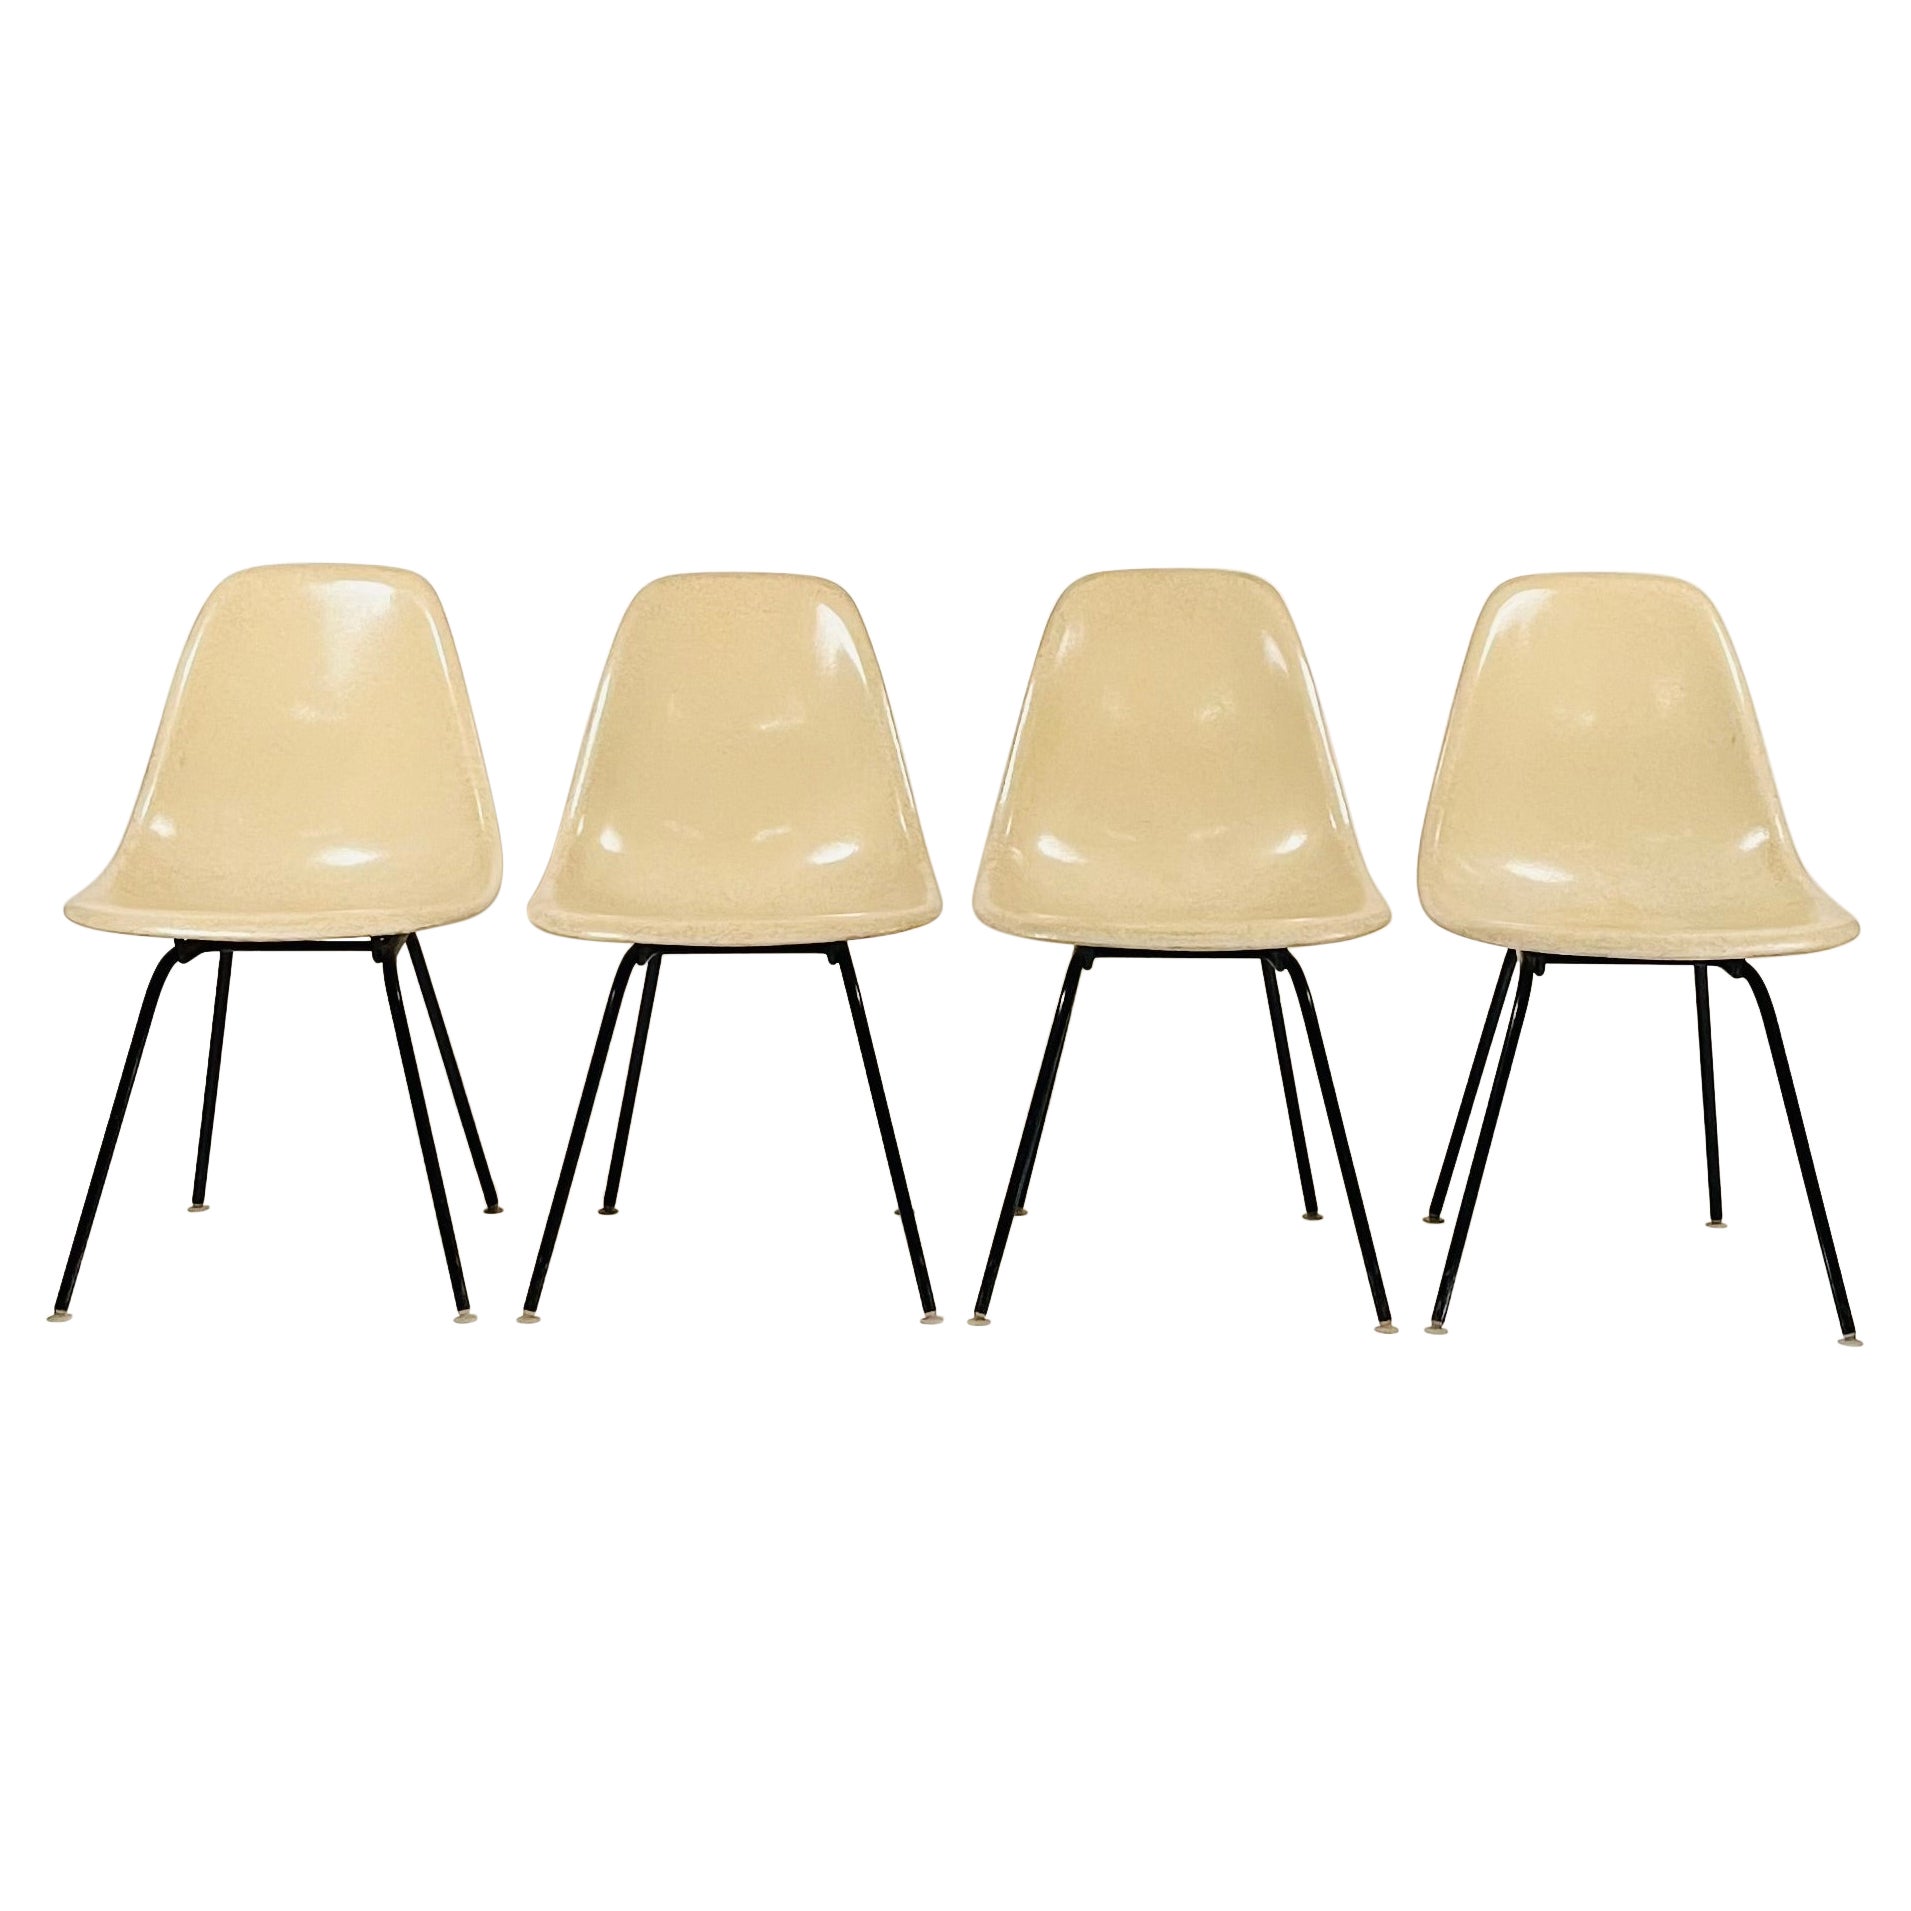 Set of 4 Vintage White Fiberglass Eames Chairs by Herman Miller For Sale